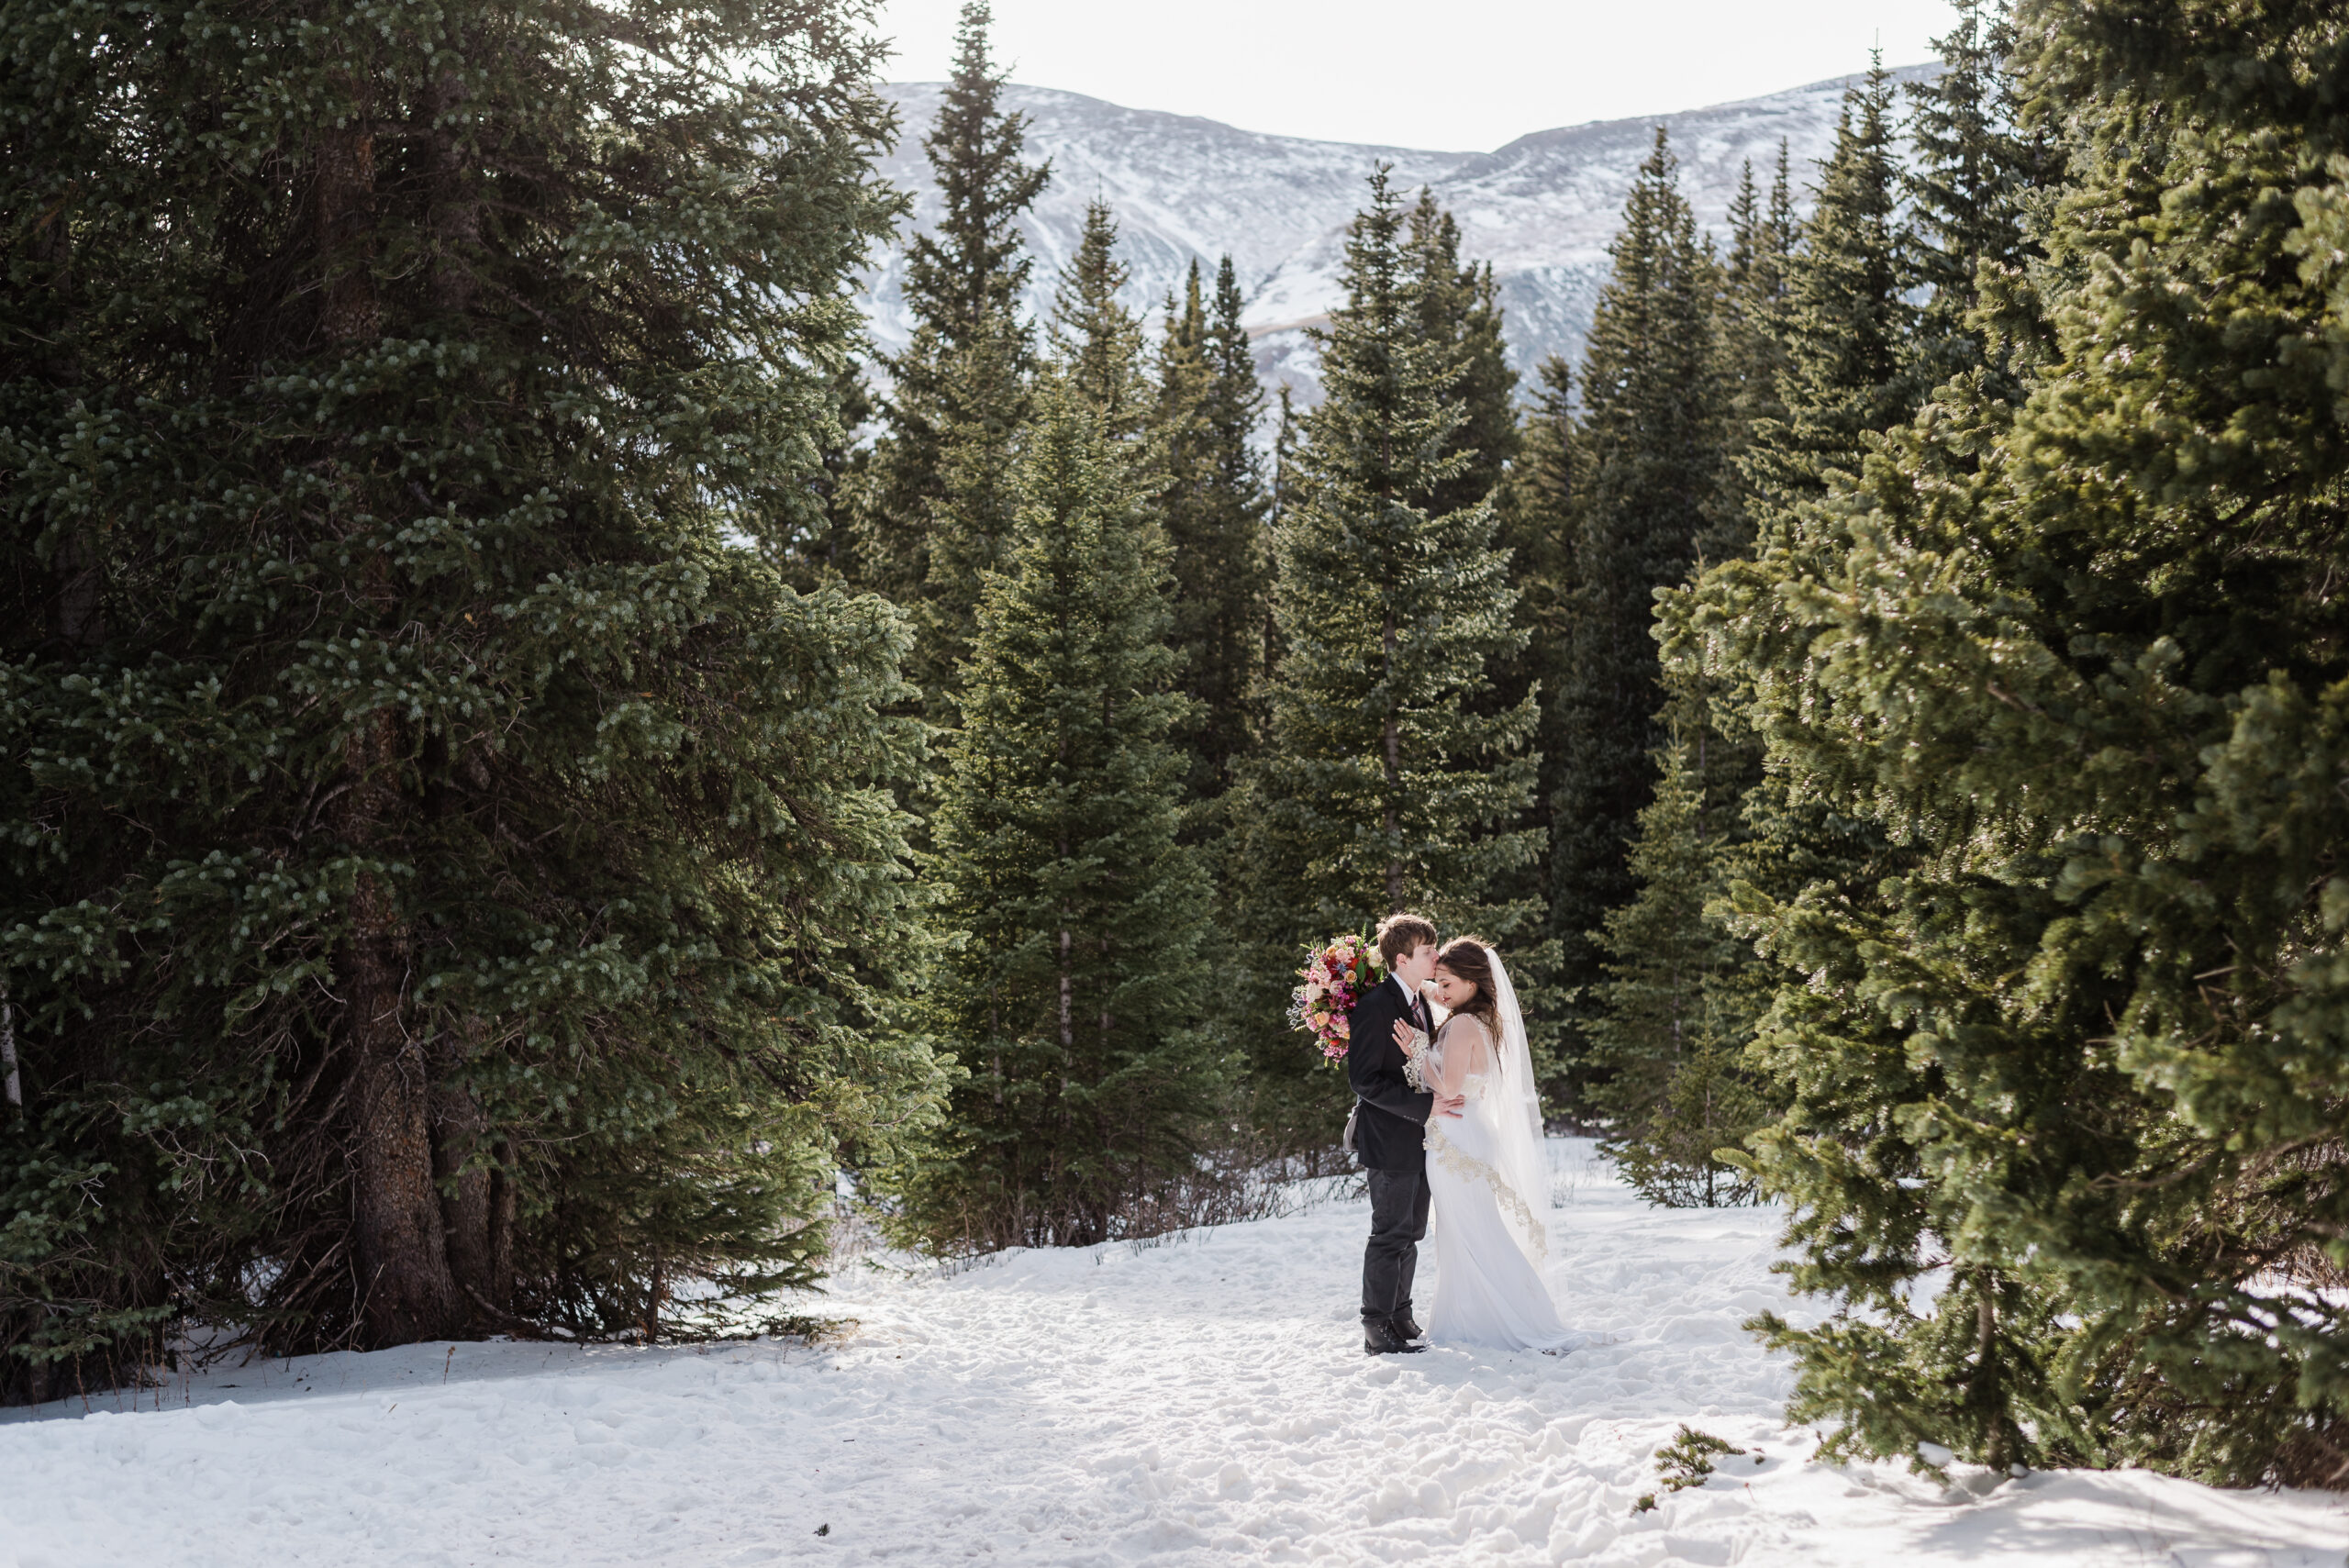 A zoomed out shot of bride and groom kissing surrounded by pine trees on a snowy mountain top